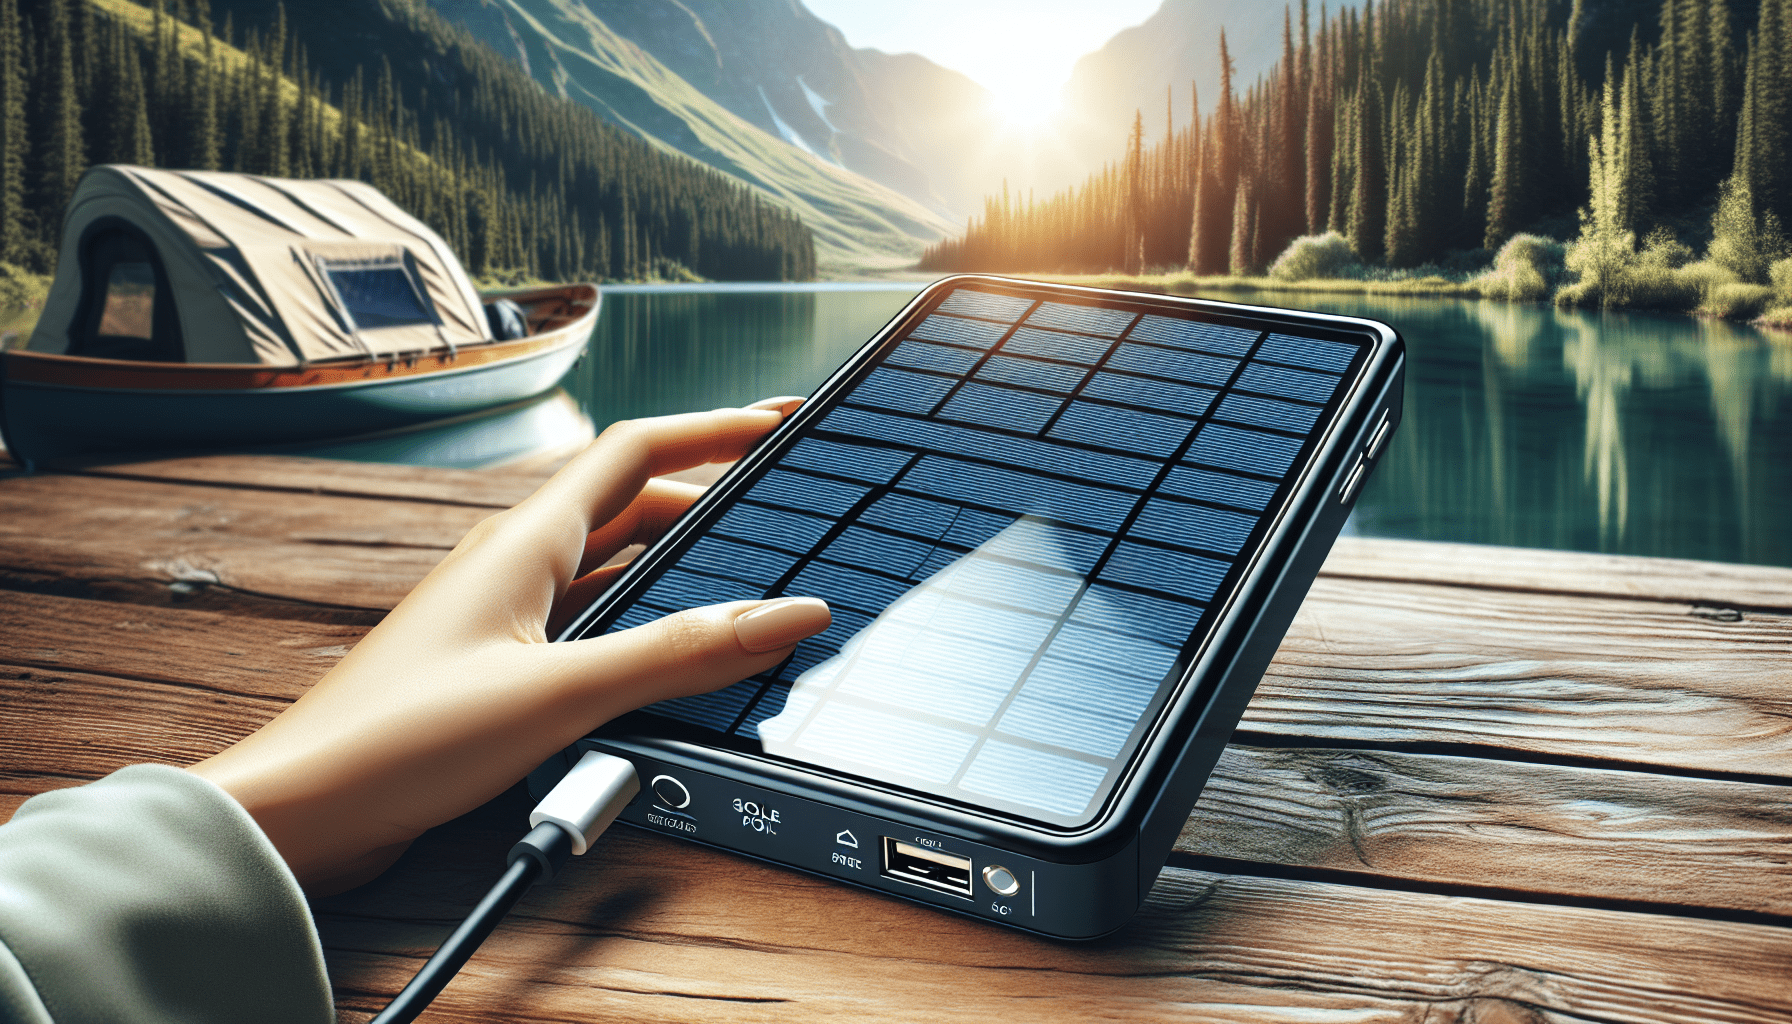 What Are The Do’s And Don’ts For Portable Solar Chargers?